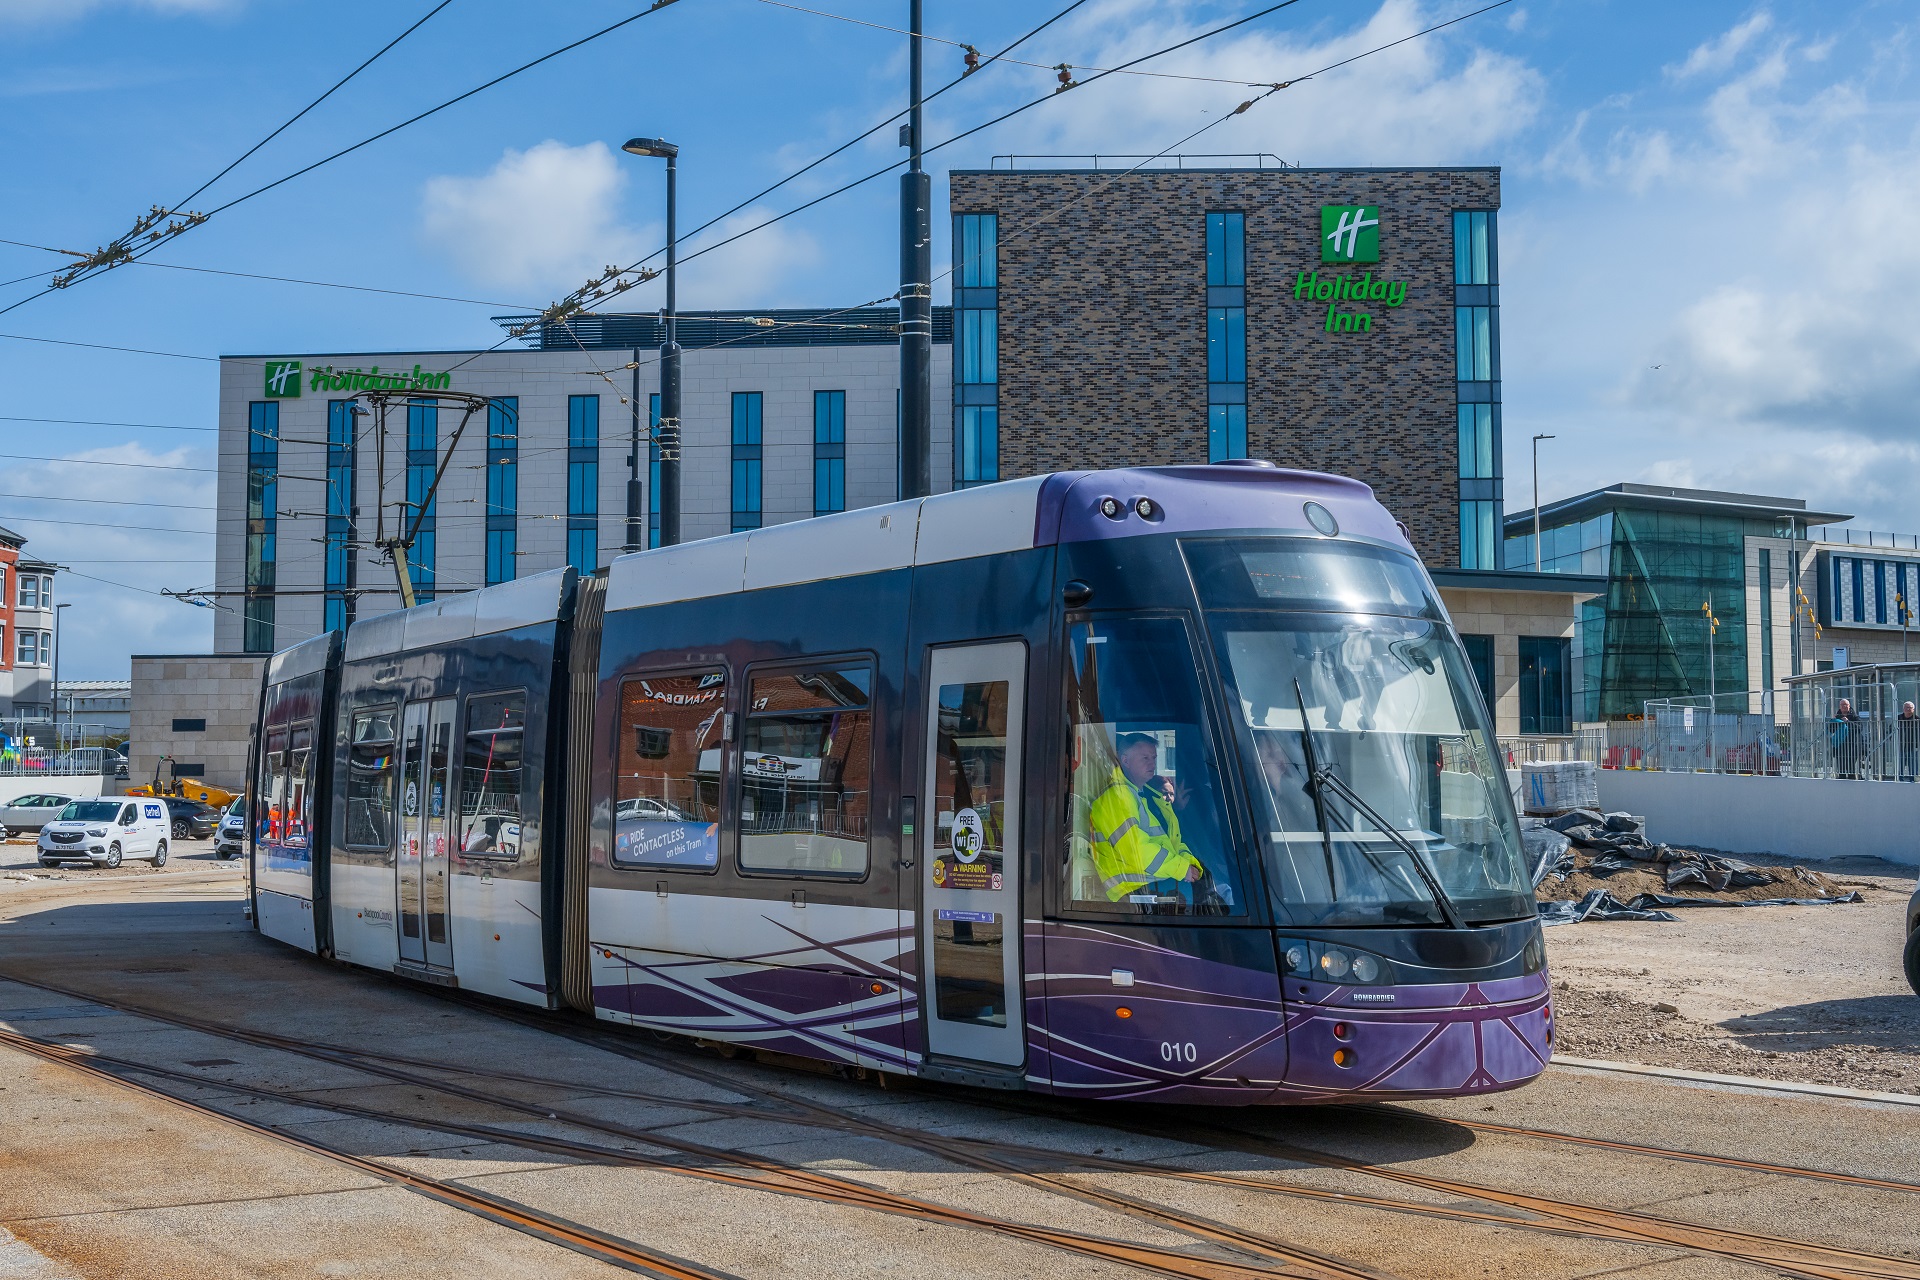 A photo showing a tram at the Talbot Gateway. In the background is a hotel and office building